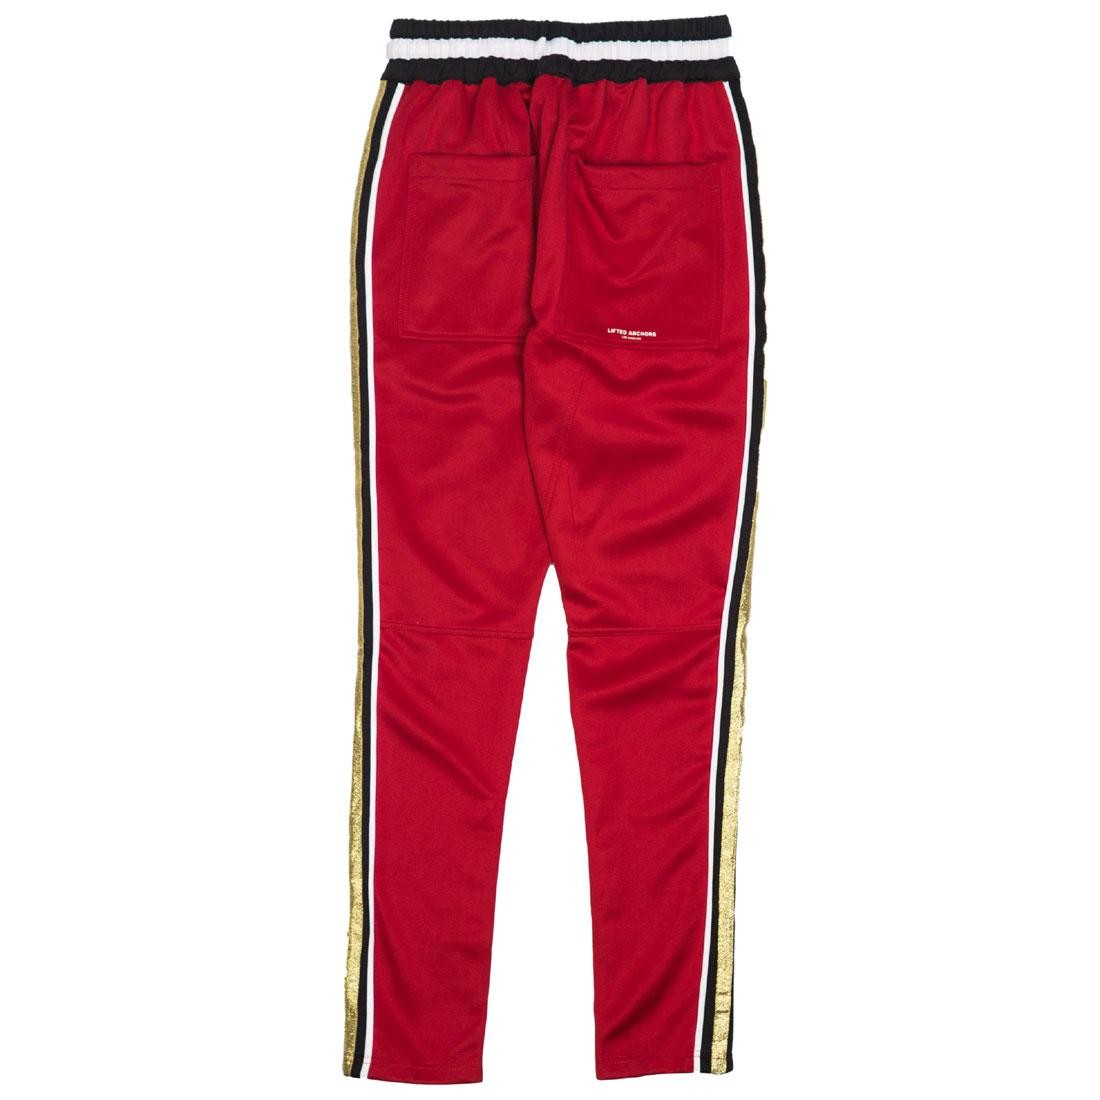 Lifted Anchors Men Jenner Track Pants - BAIT Exclusive red gold